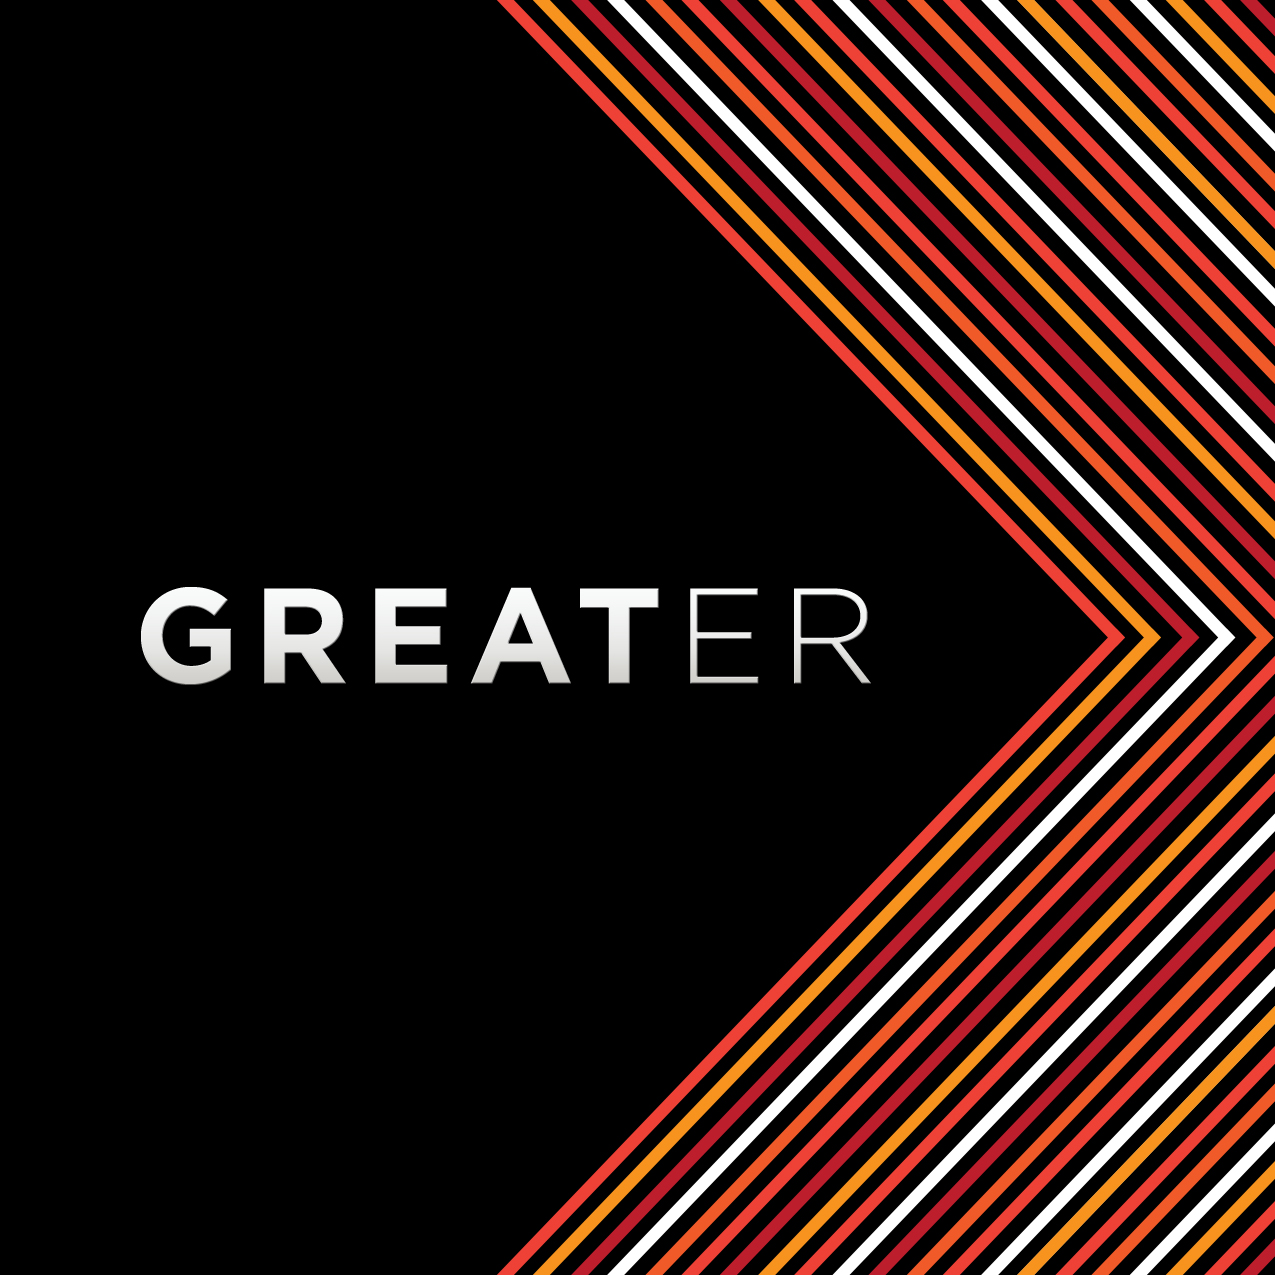 GREATER: An Easy Thing